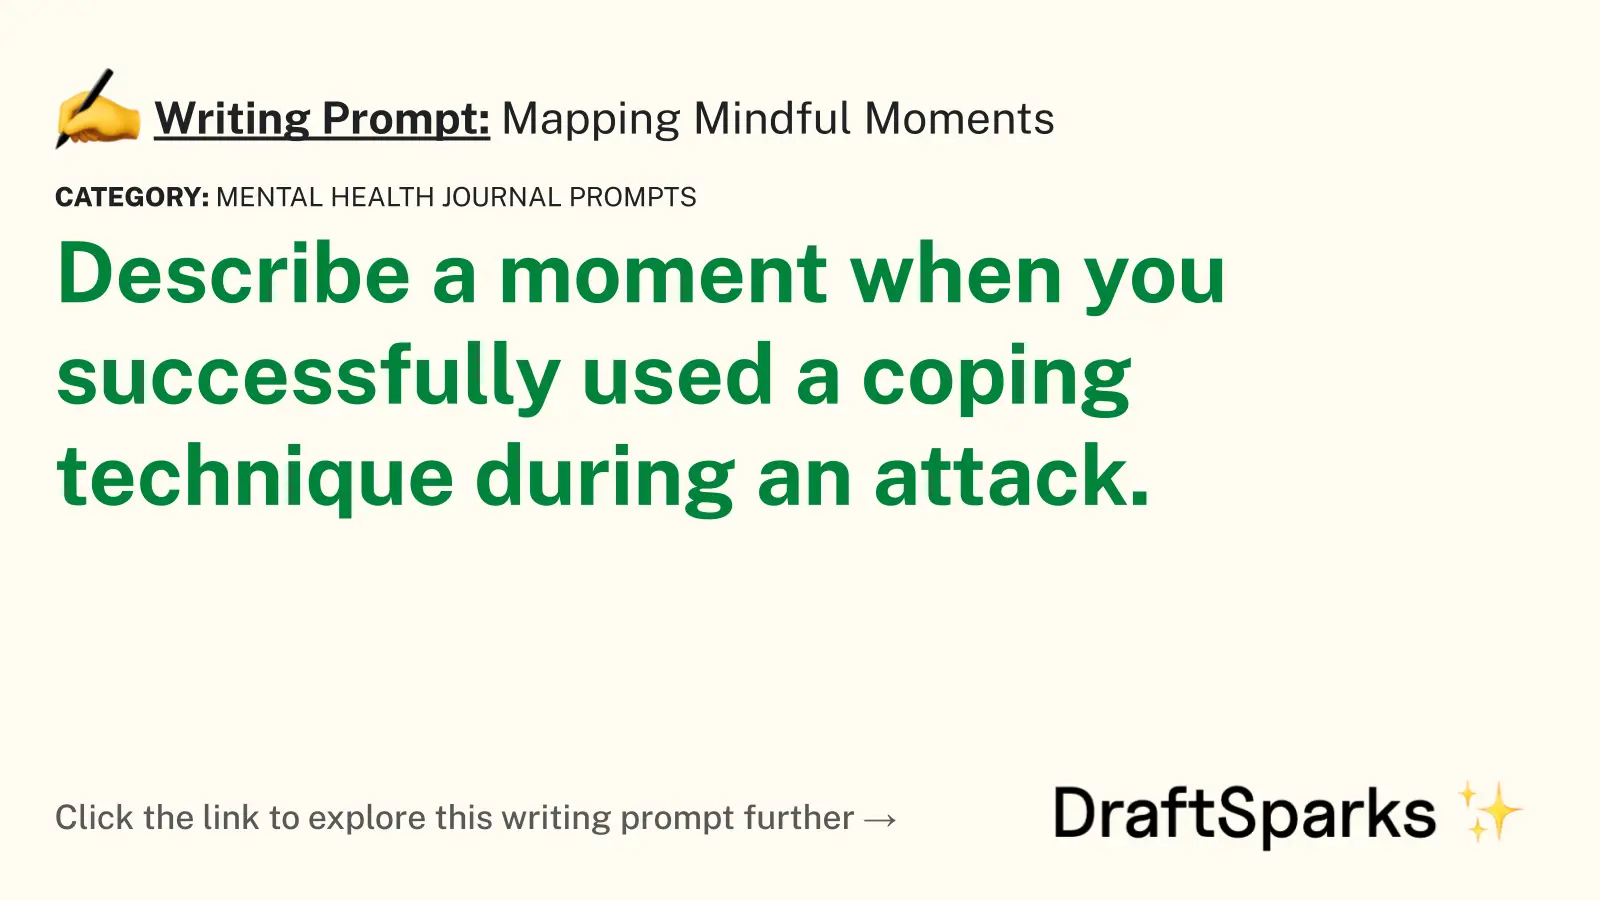 Mapping Mindful Moments